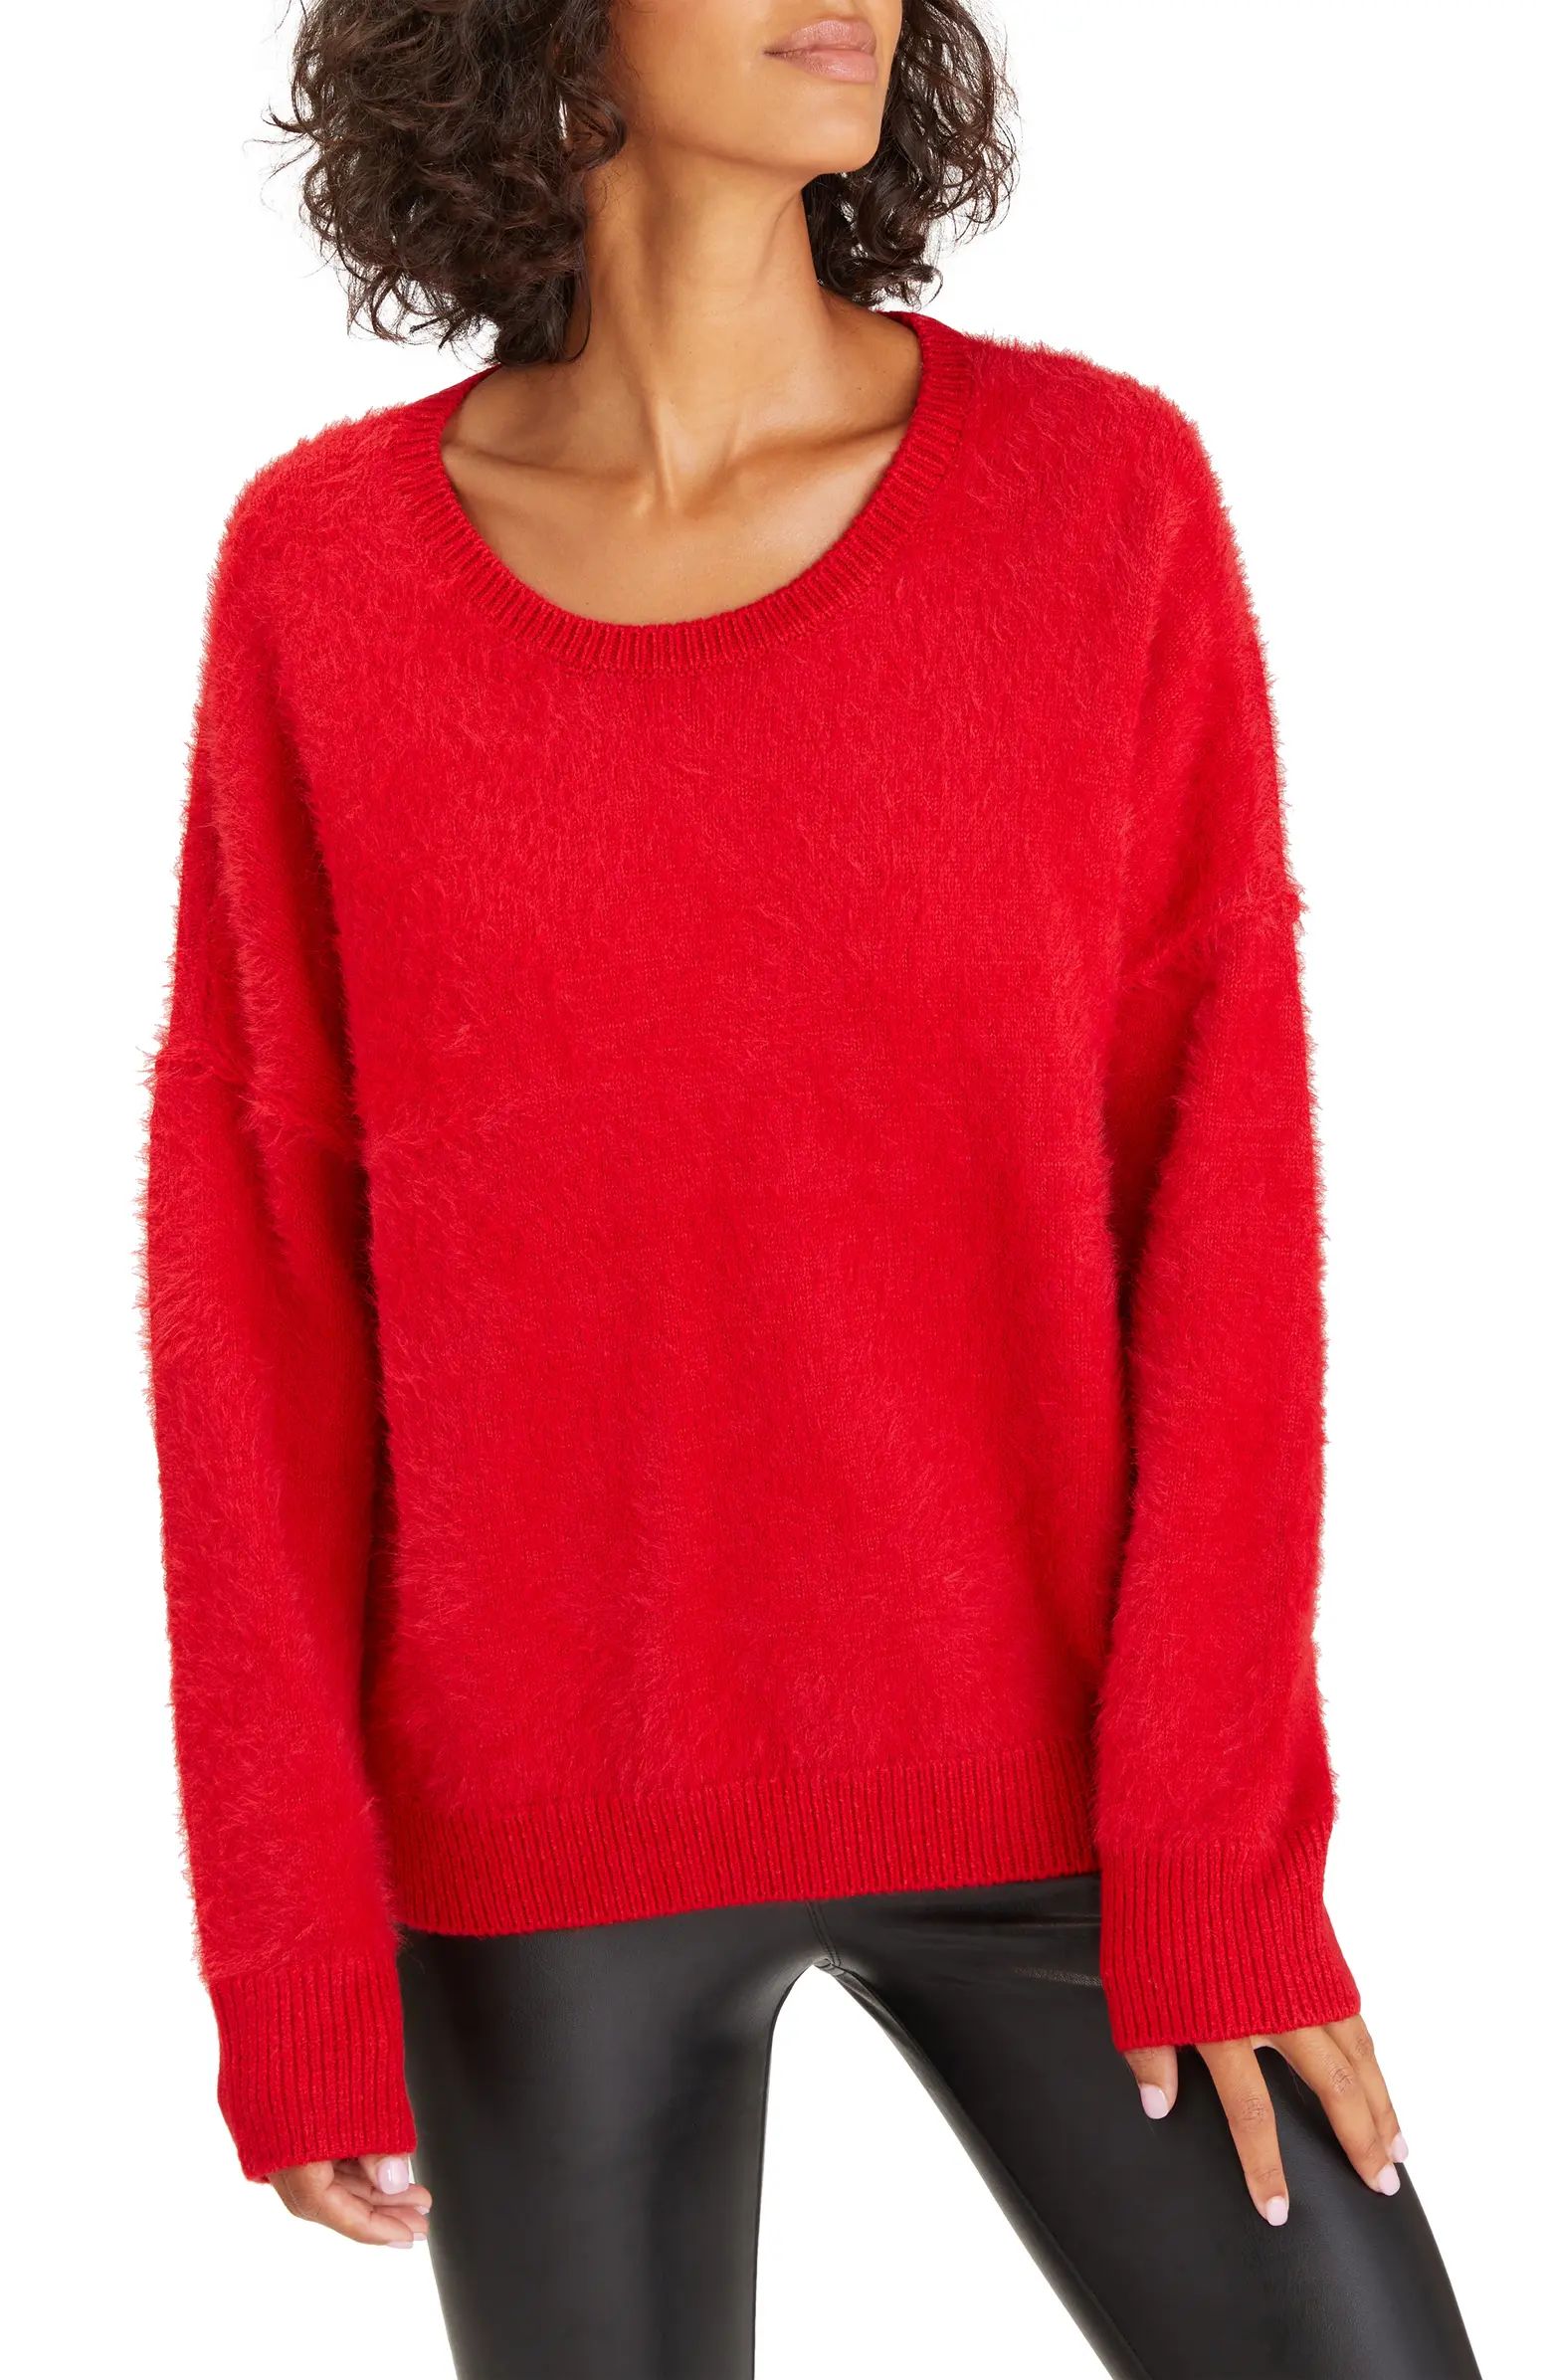 Fluff it Up Sweater | Nordstrom